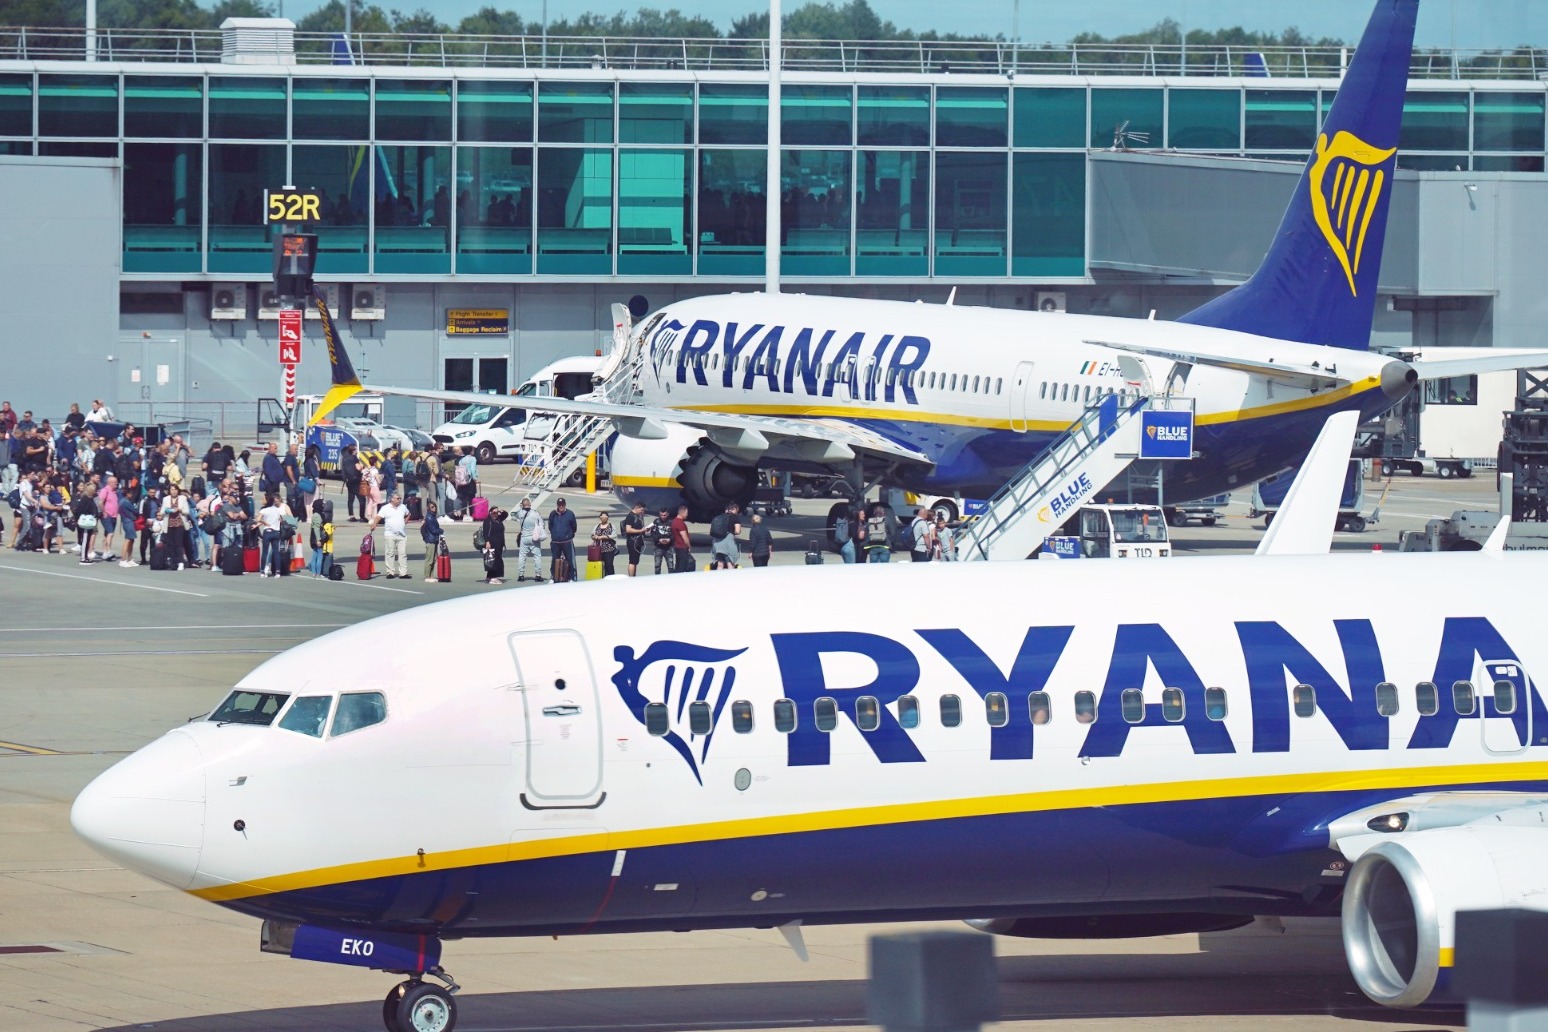 Ryanair boss: 10 euro fares to disappear due to rising fuel prices 